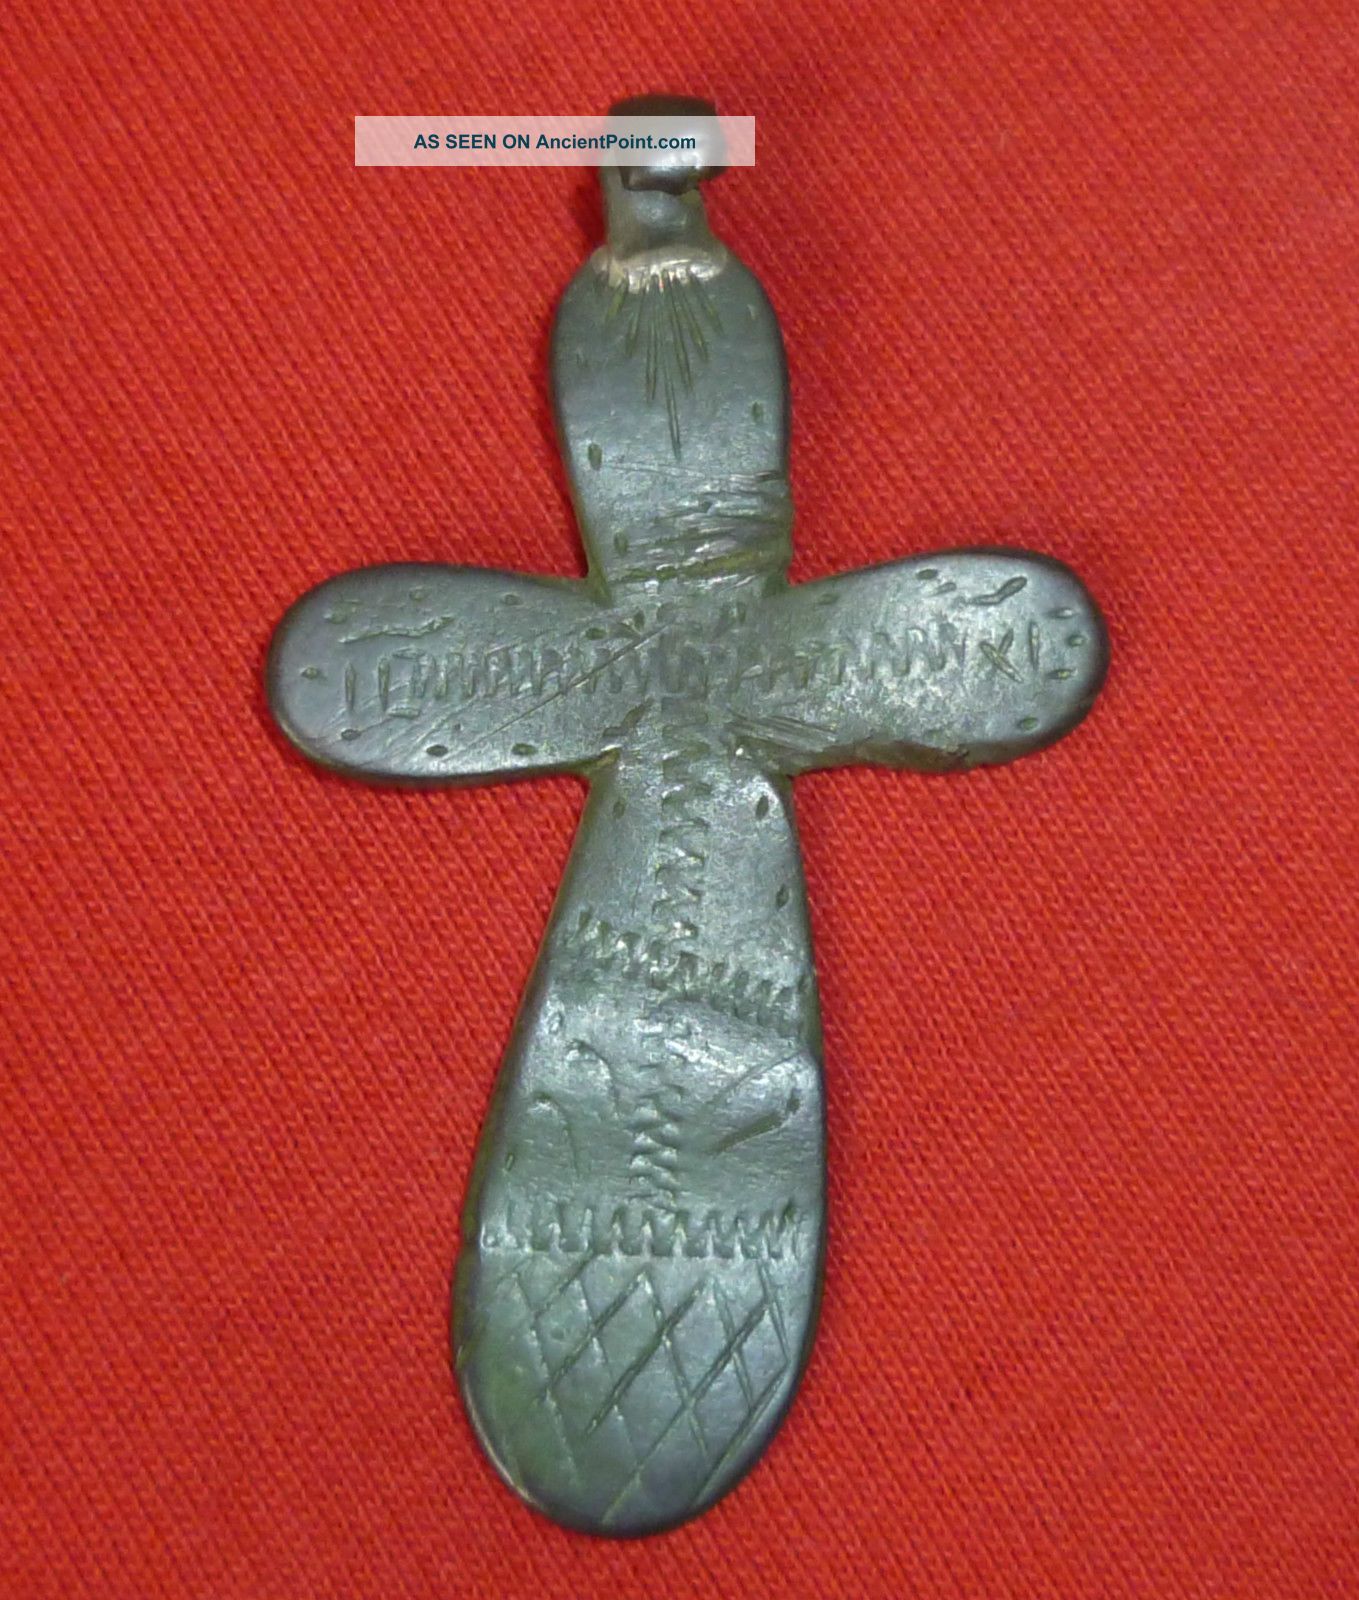 Rare Roman Ancient Bronze Cross - Coiled Amulet / Pendant Circa 200 - 300 Ad - 1447 Other Antiquities photo